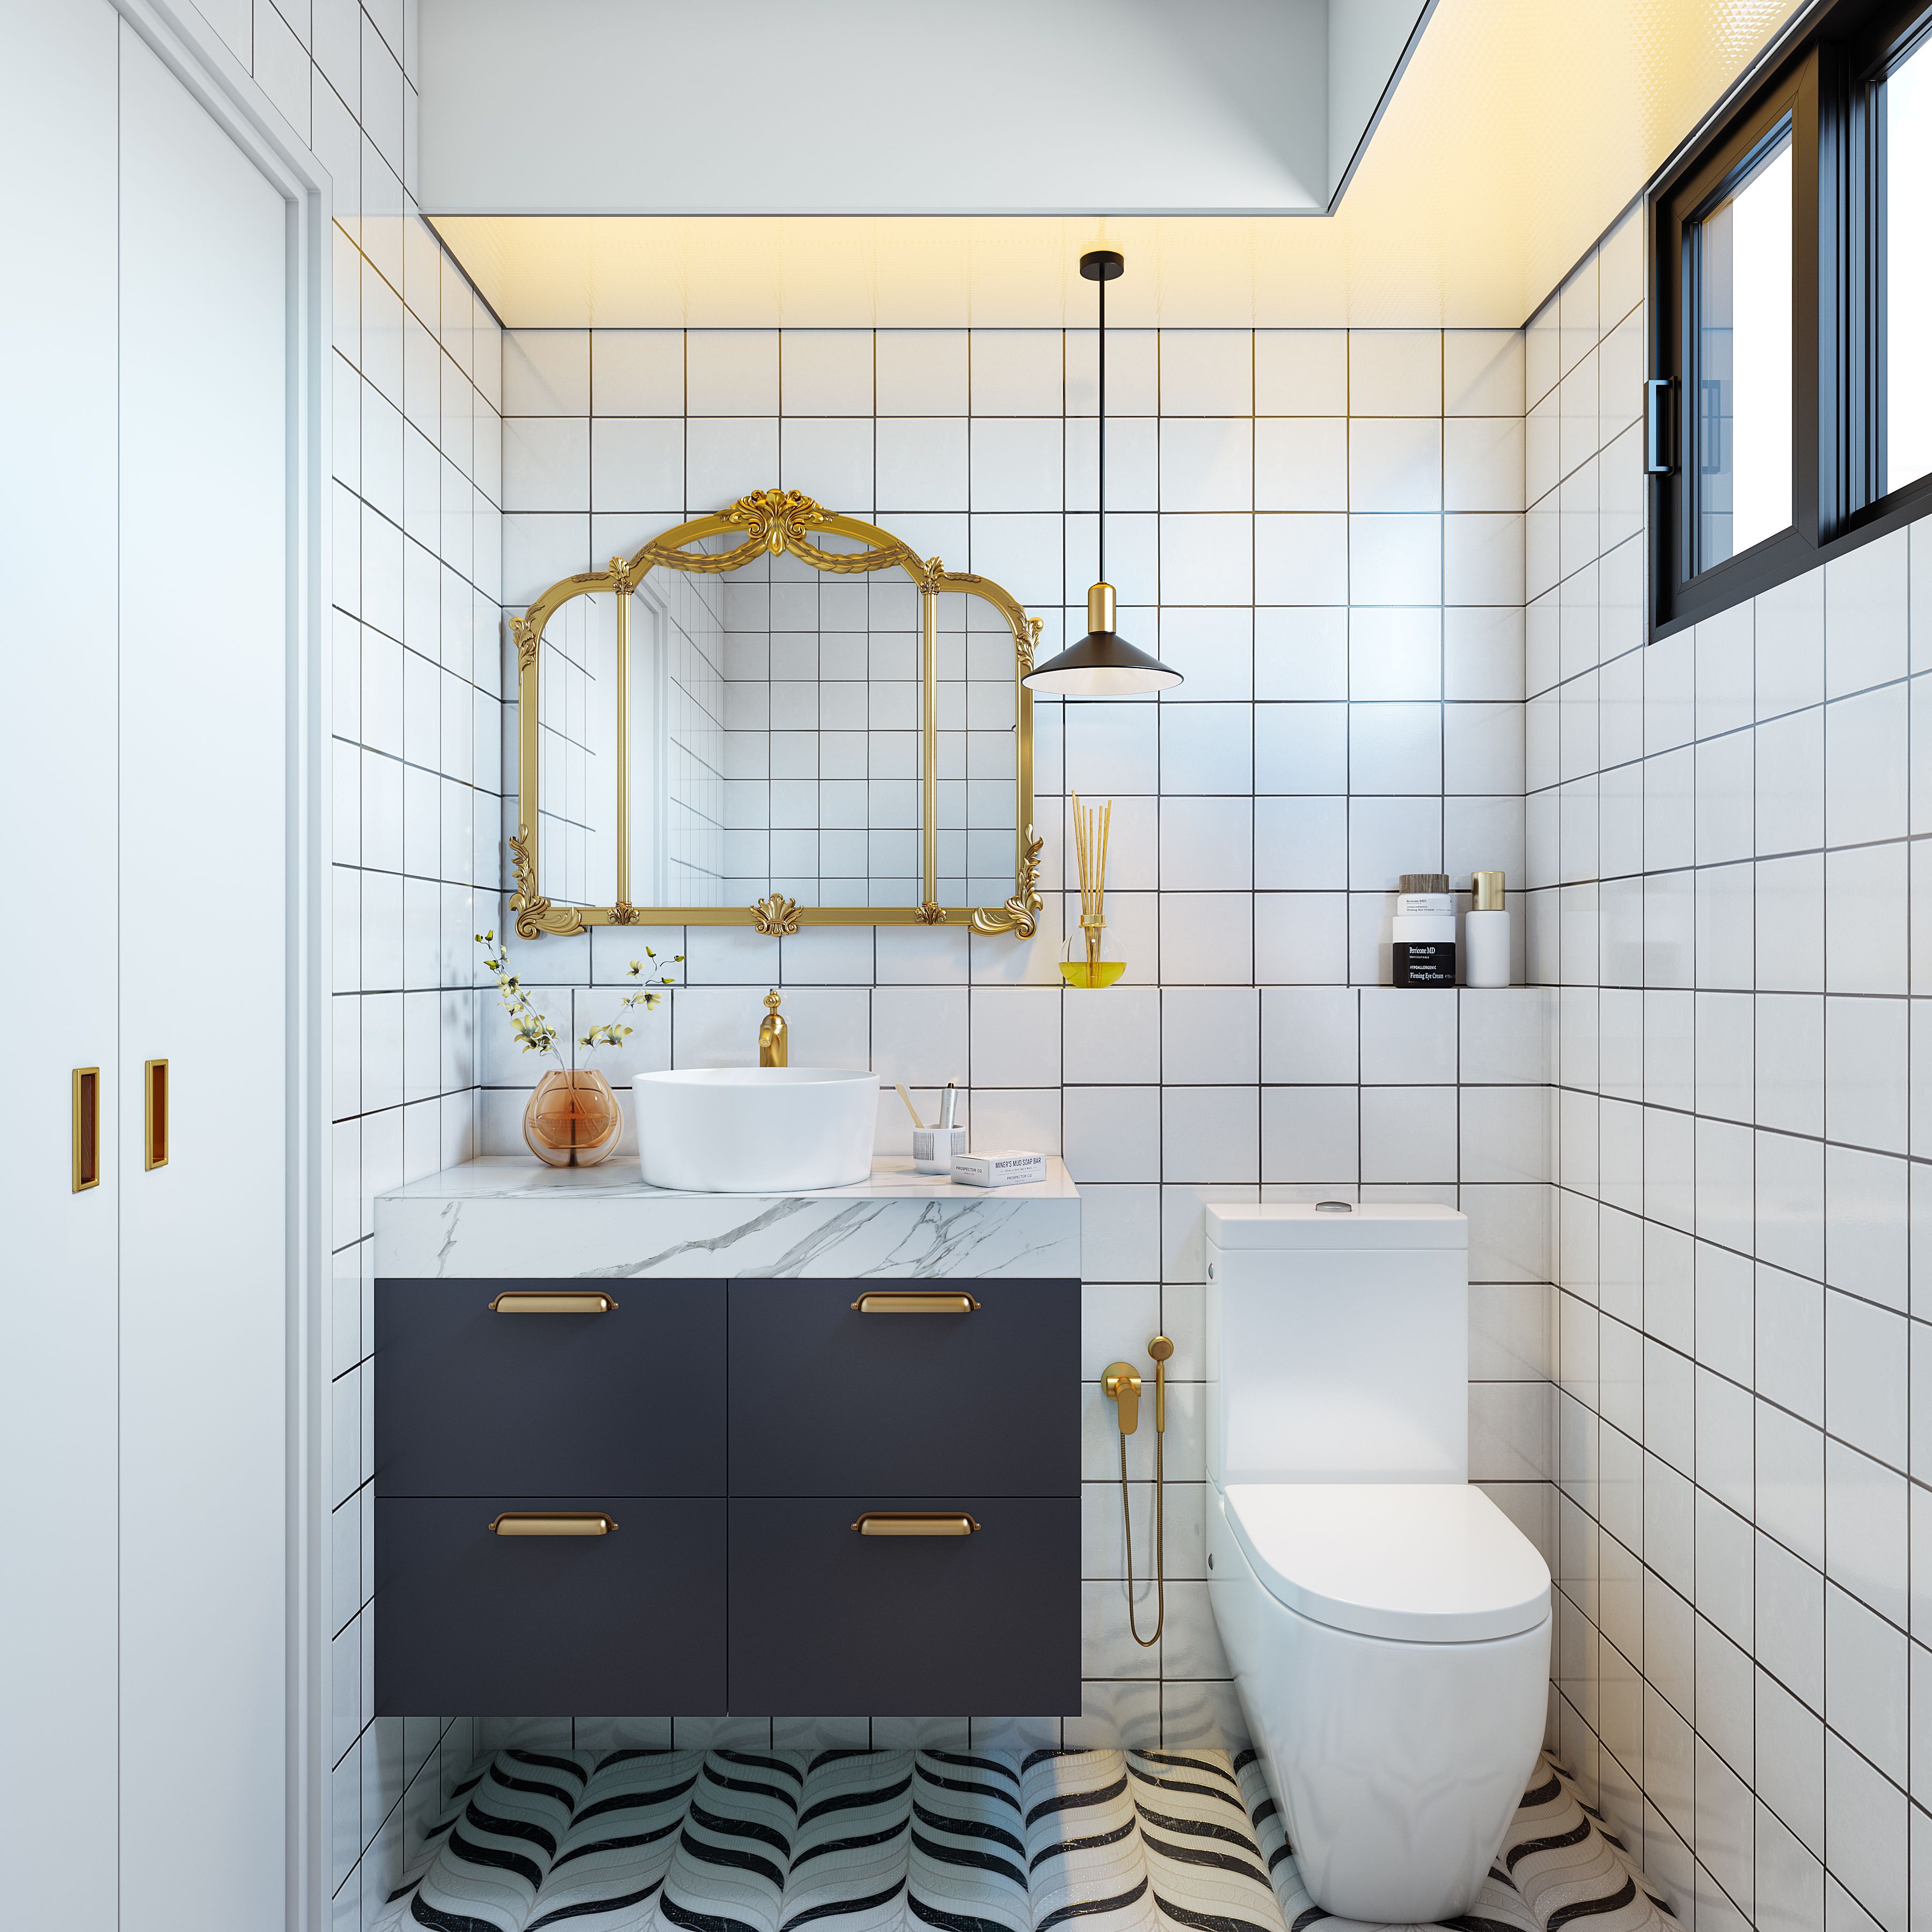 Modern Compact Toilet Design With Patterned Floor Tiles